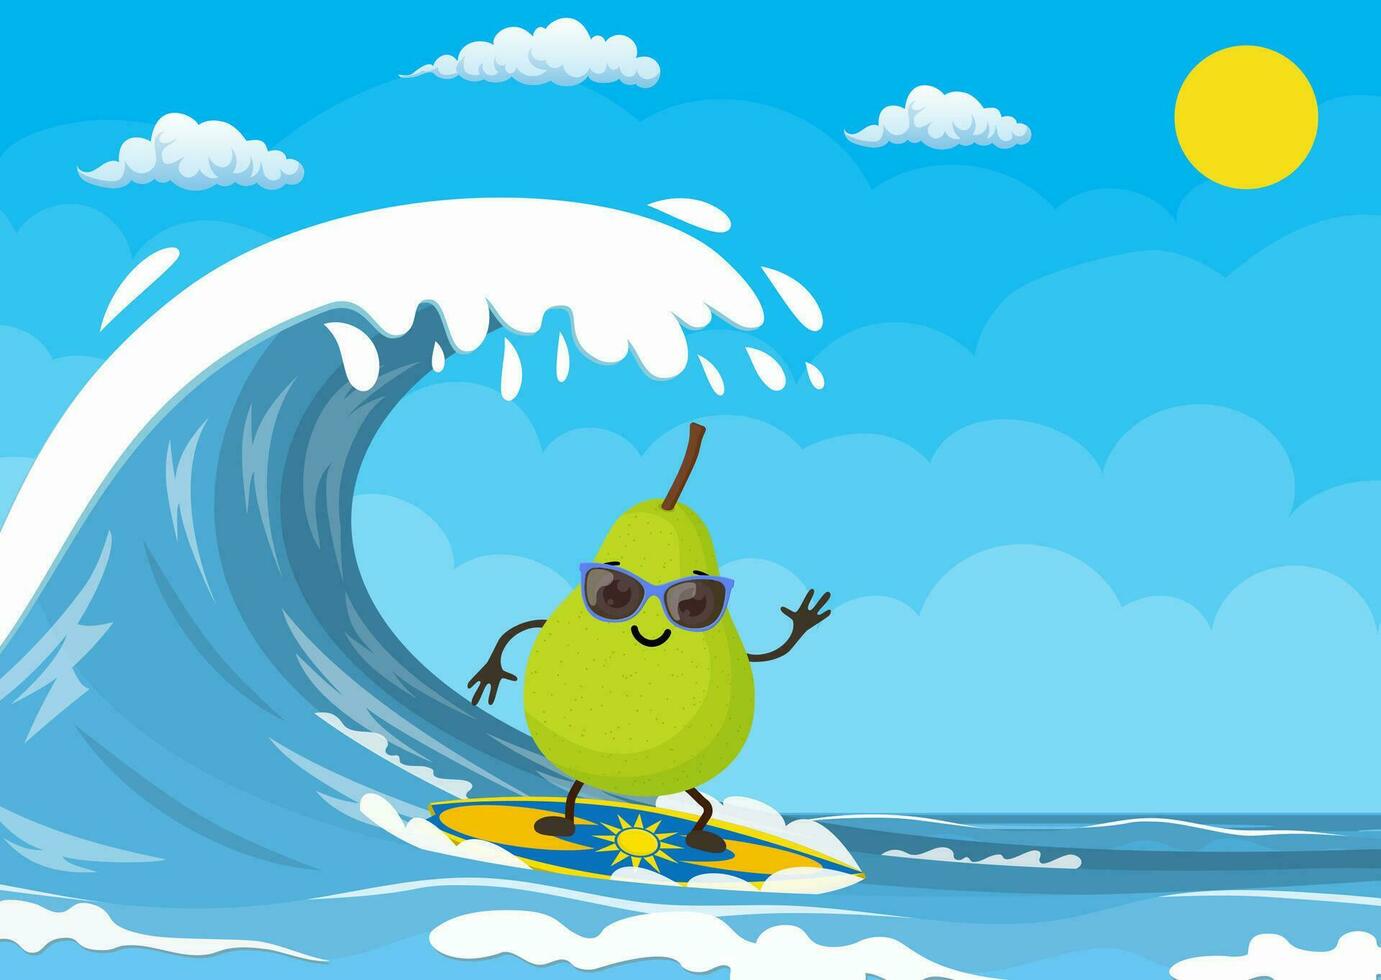 pear characters surfing on wave. Holidays on the sea. Beach activities. Summer time. Vector illustration in flat style